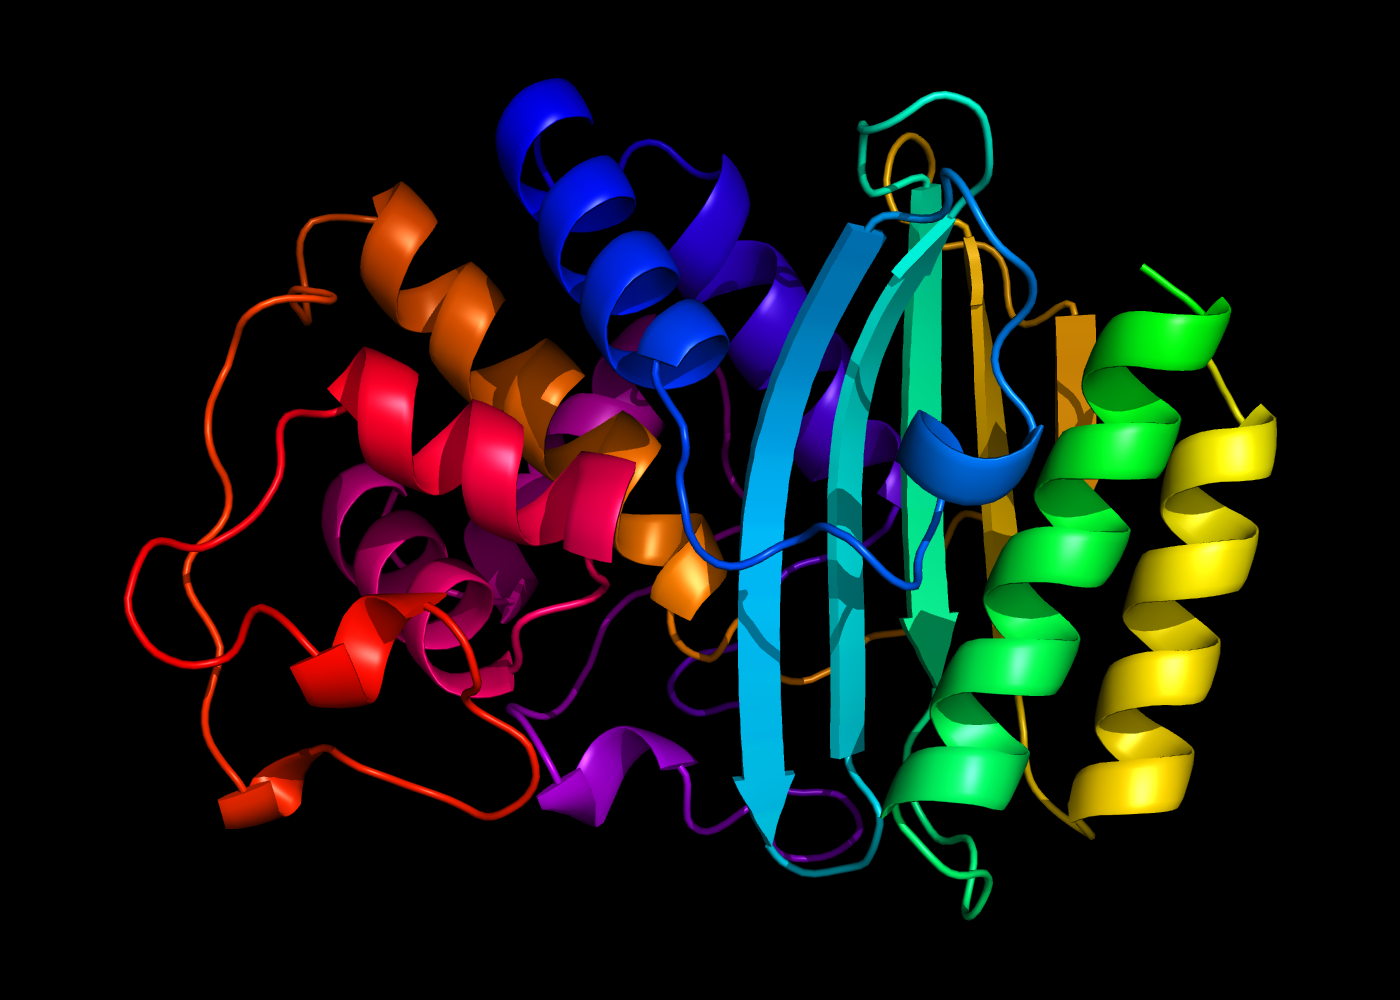 Coloring a protein's main chain using a very pretty gradient.